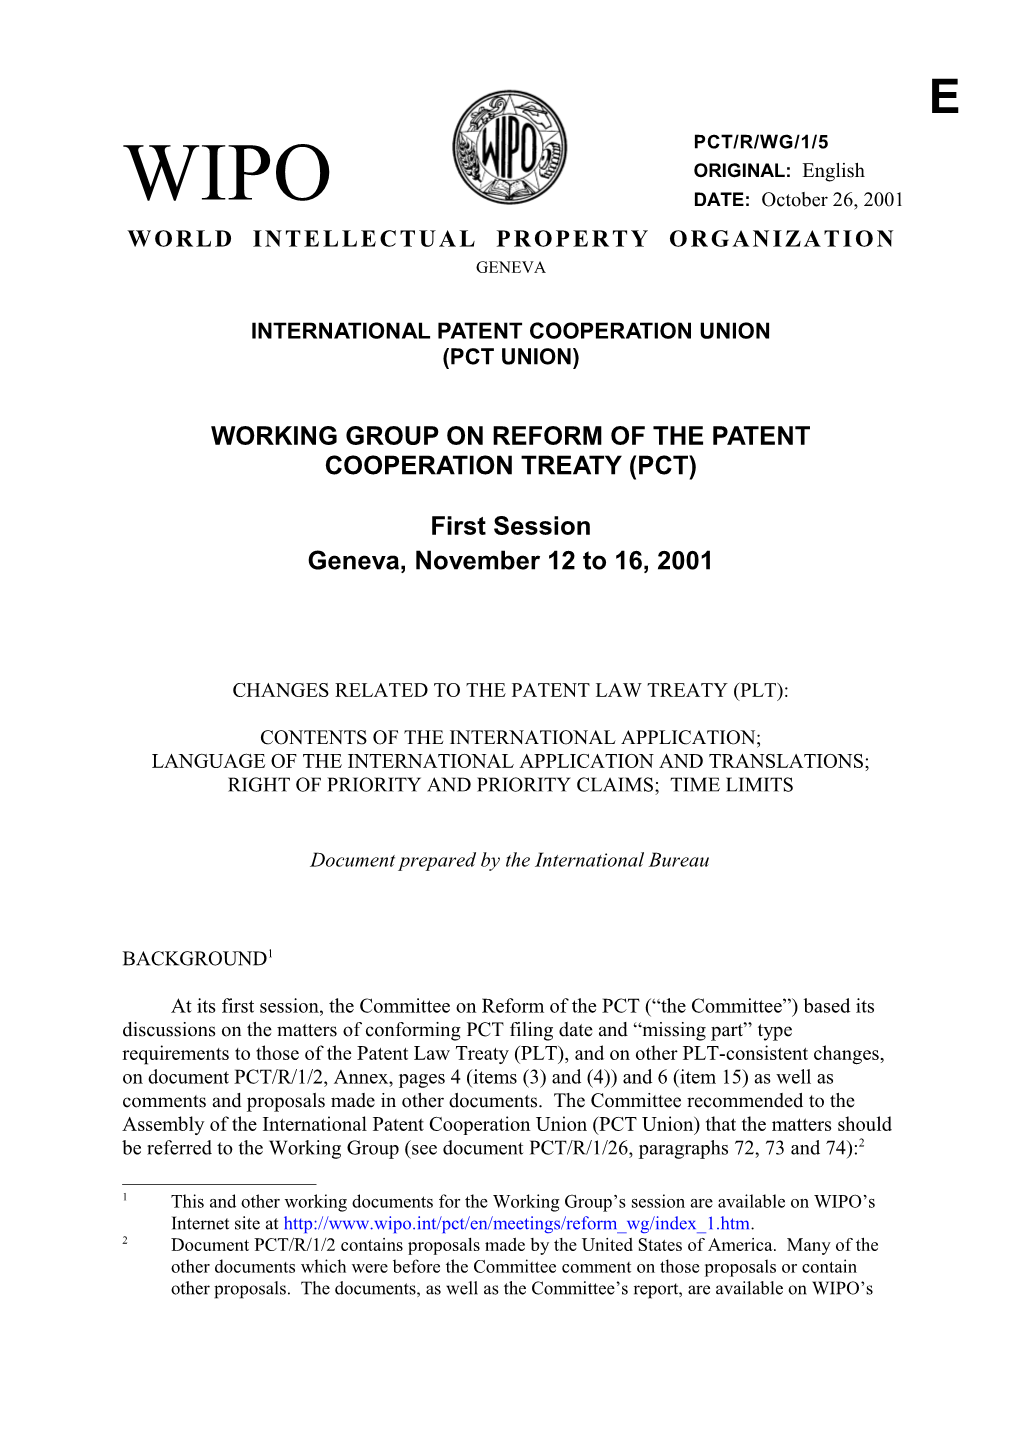 PCT/R/WG/1/5: Changes Related to the Patent Law Treaty (PLT): Contents of the International